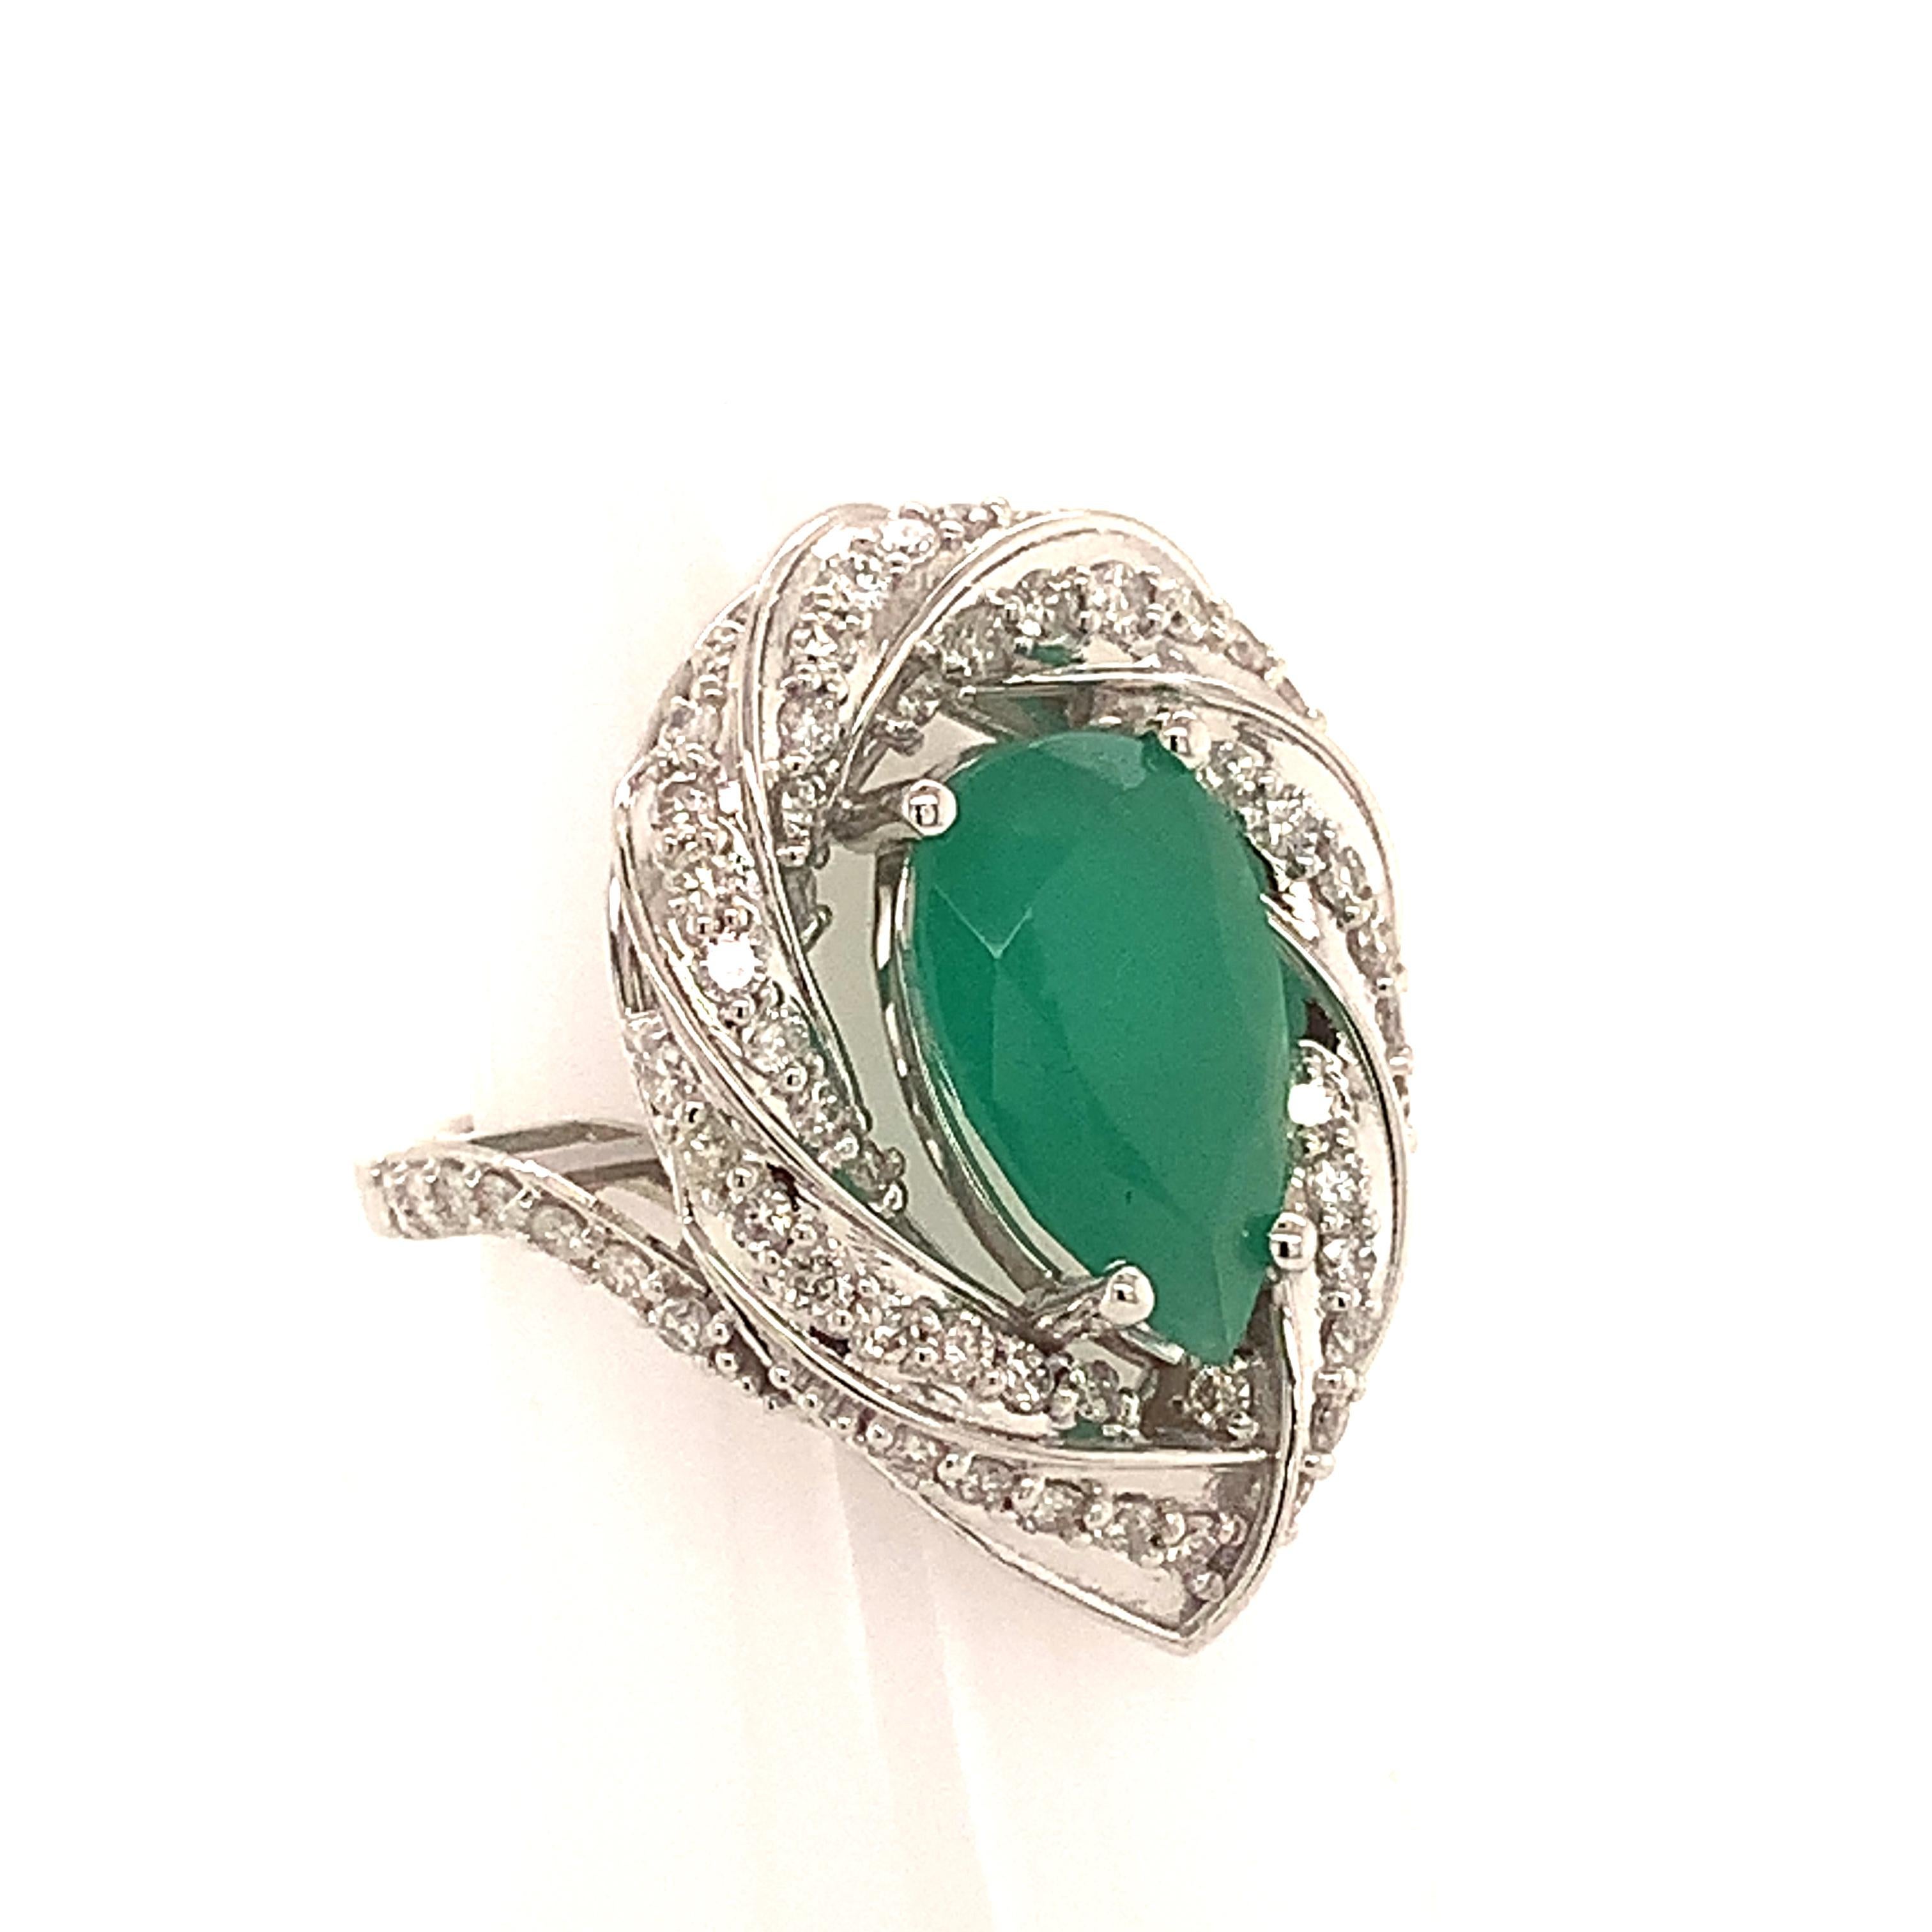 Natural Finely Faceted Quality Emerald Diamond Ring Size 6.75 14k Gold 6.1 TCW Certified $6,950 114425

This is a Unique Custom Made Glamorous Piece of Jewelry!

Nothing says, “I Love you” more than Diamonds and Pearls!

This Emerald Diamond ring